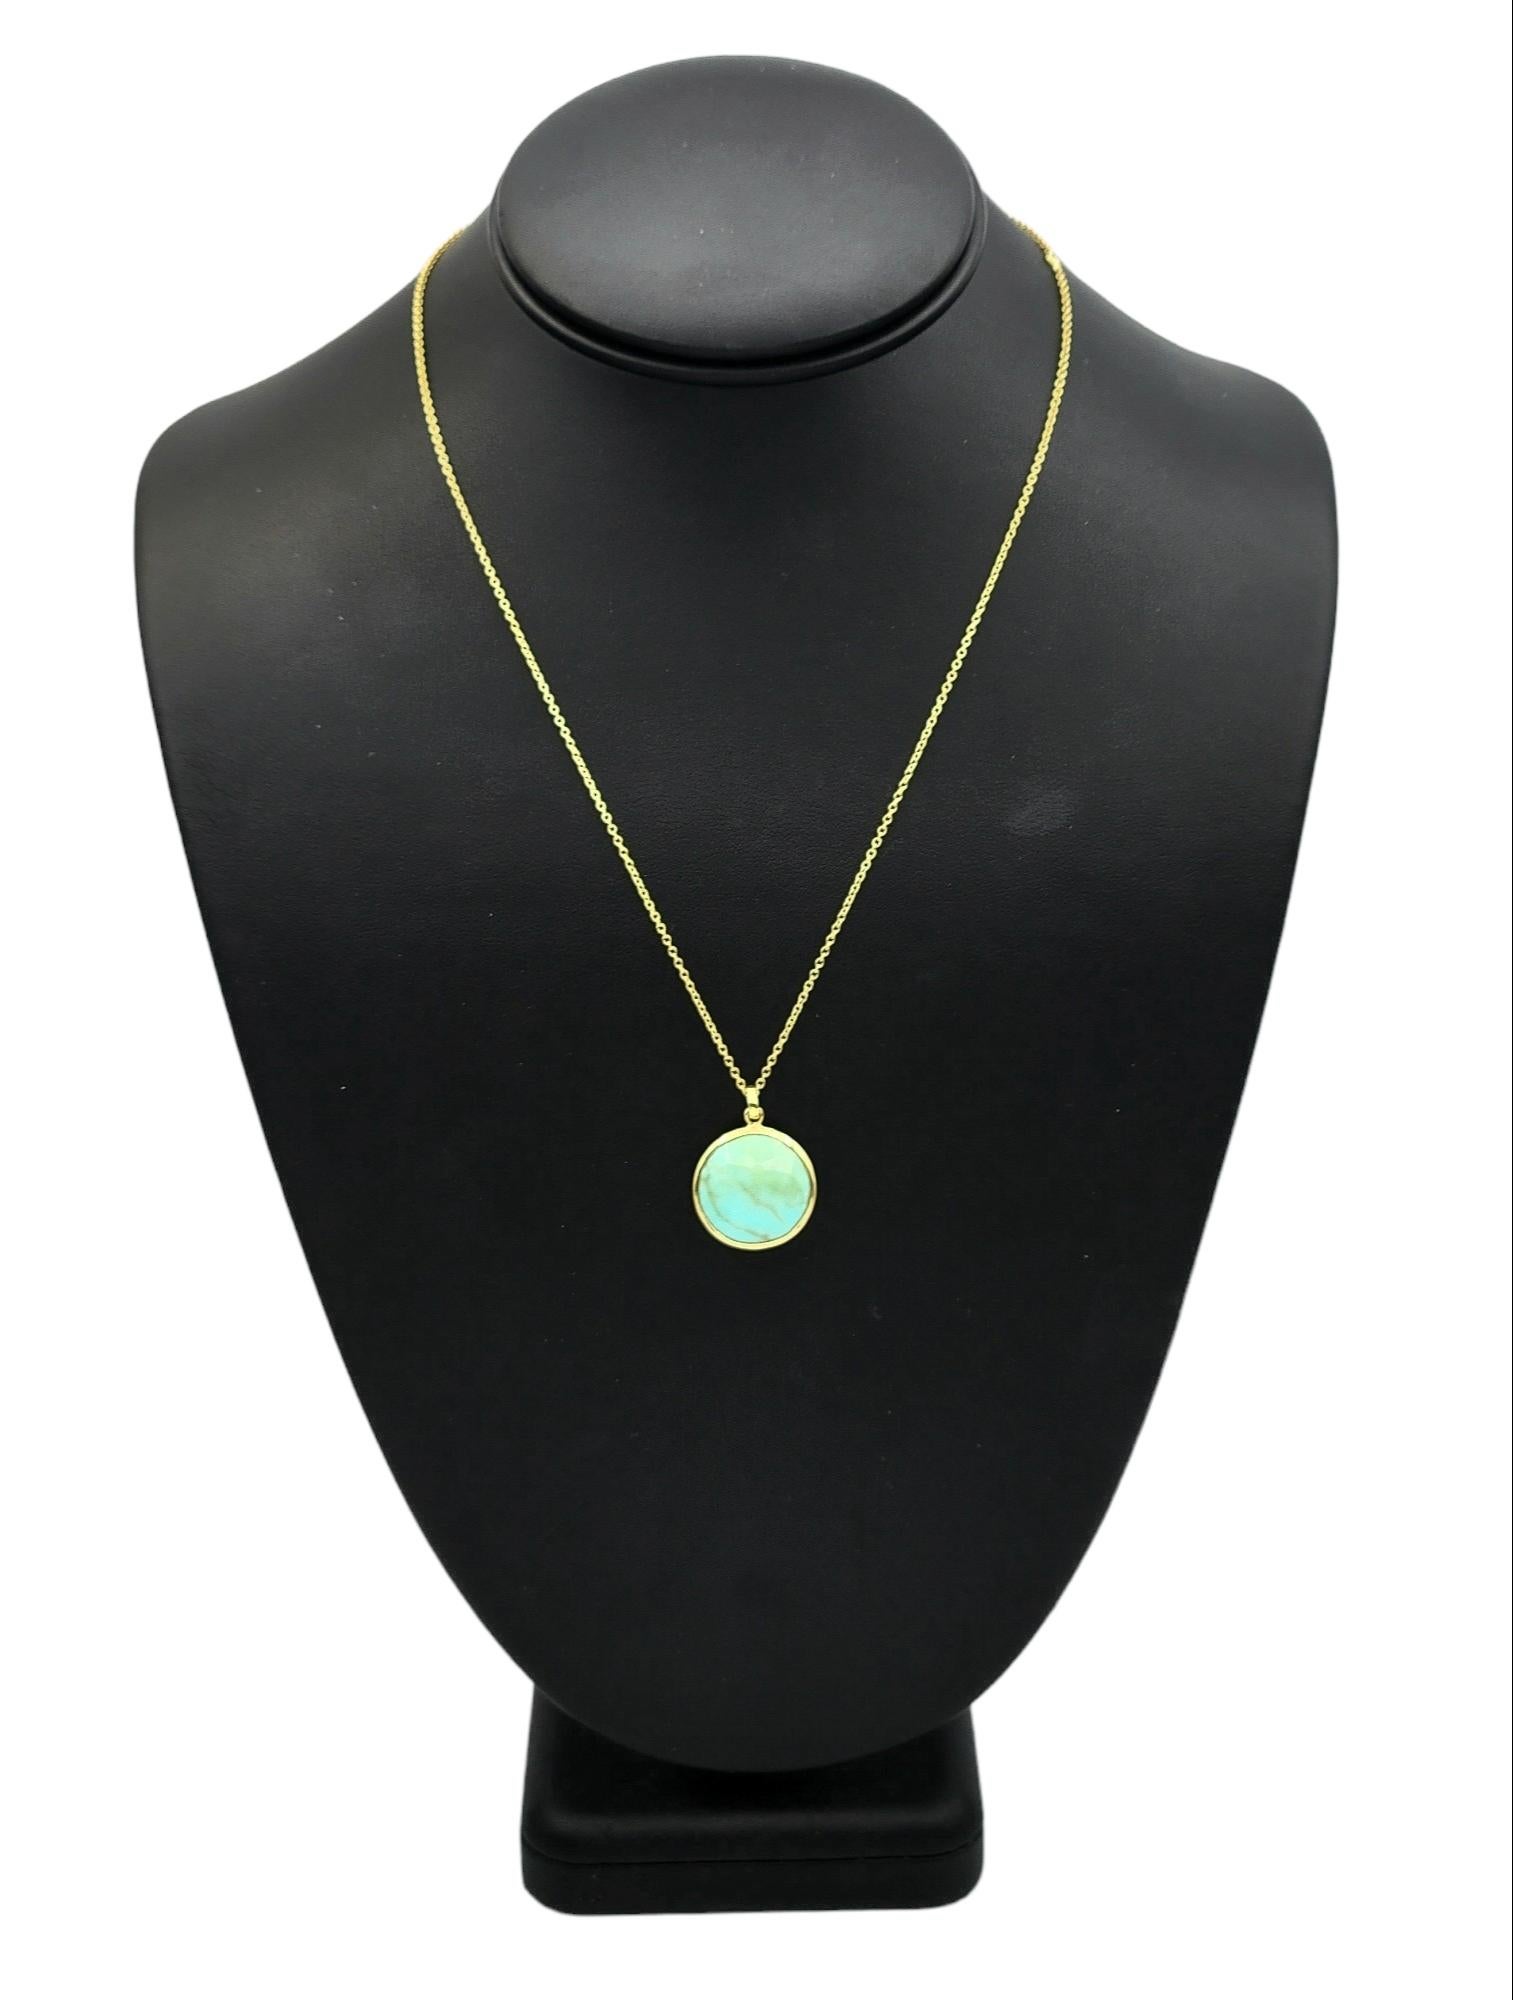 Round Cut Ippolita Lollipop Medium Solitaire Turquoise Pendant Necklace in 18K Yellow Gold For Sale